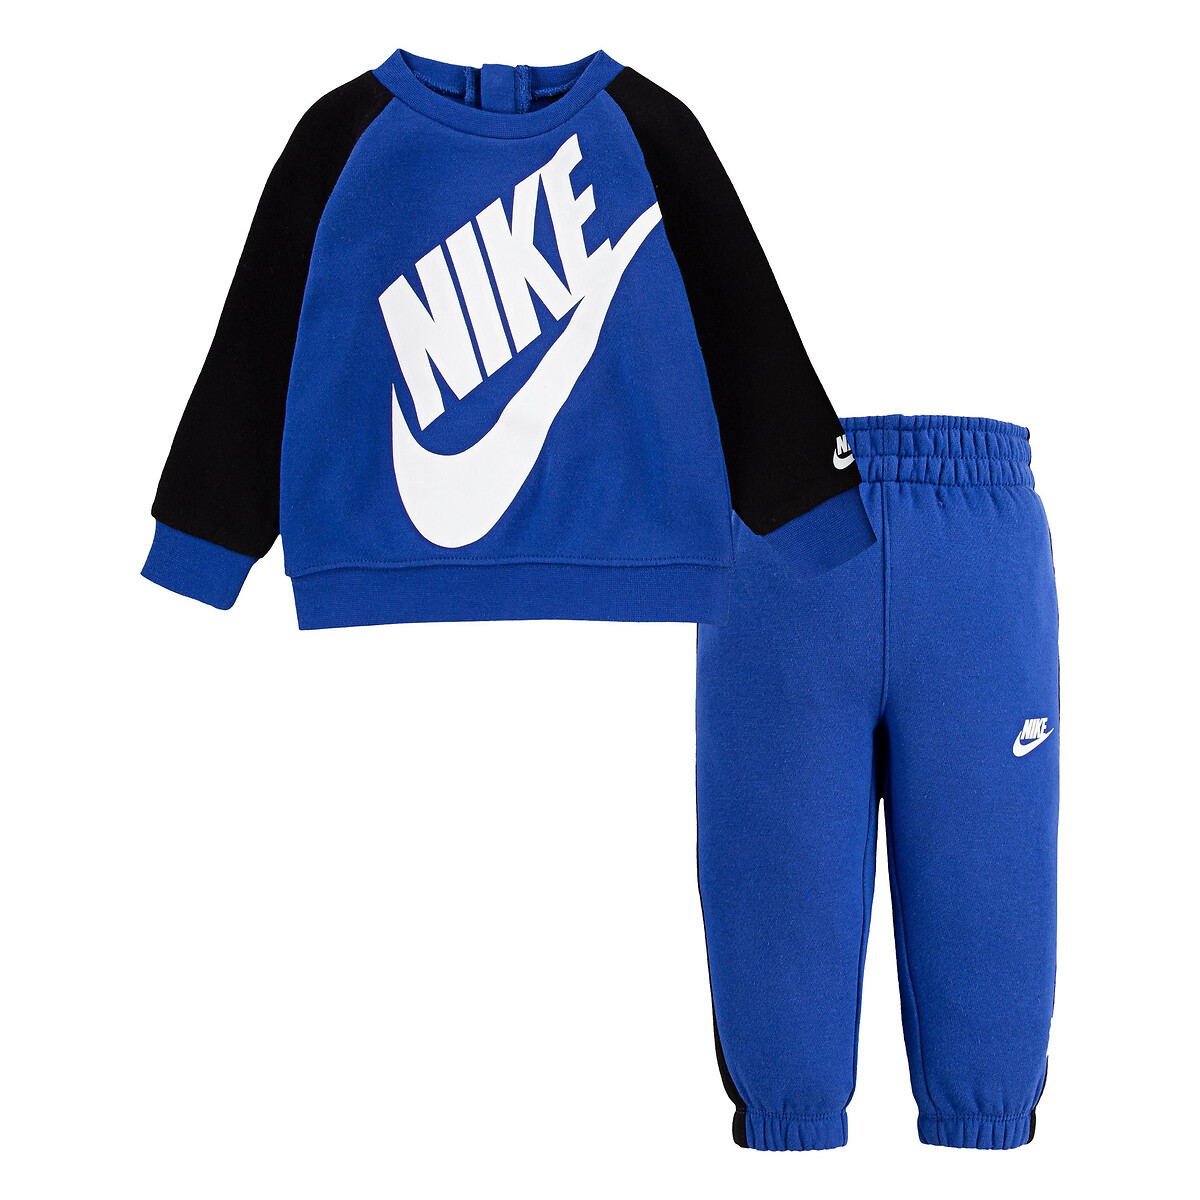 Crew Neck Sweatshirt/Joggers Outfit in Cotton Mix